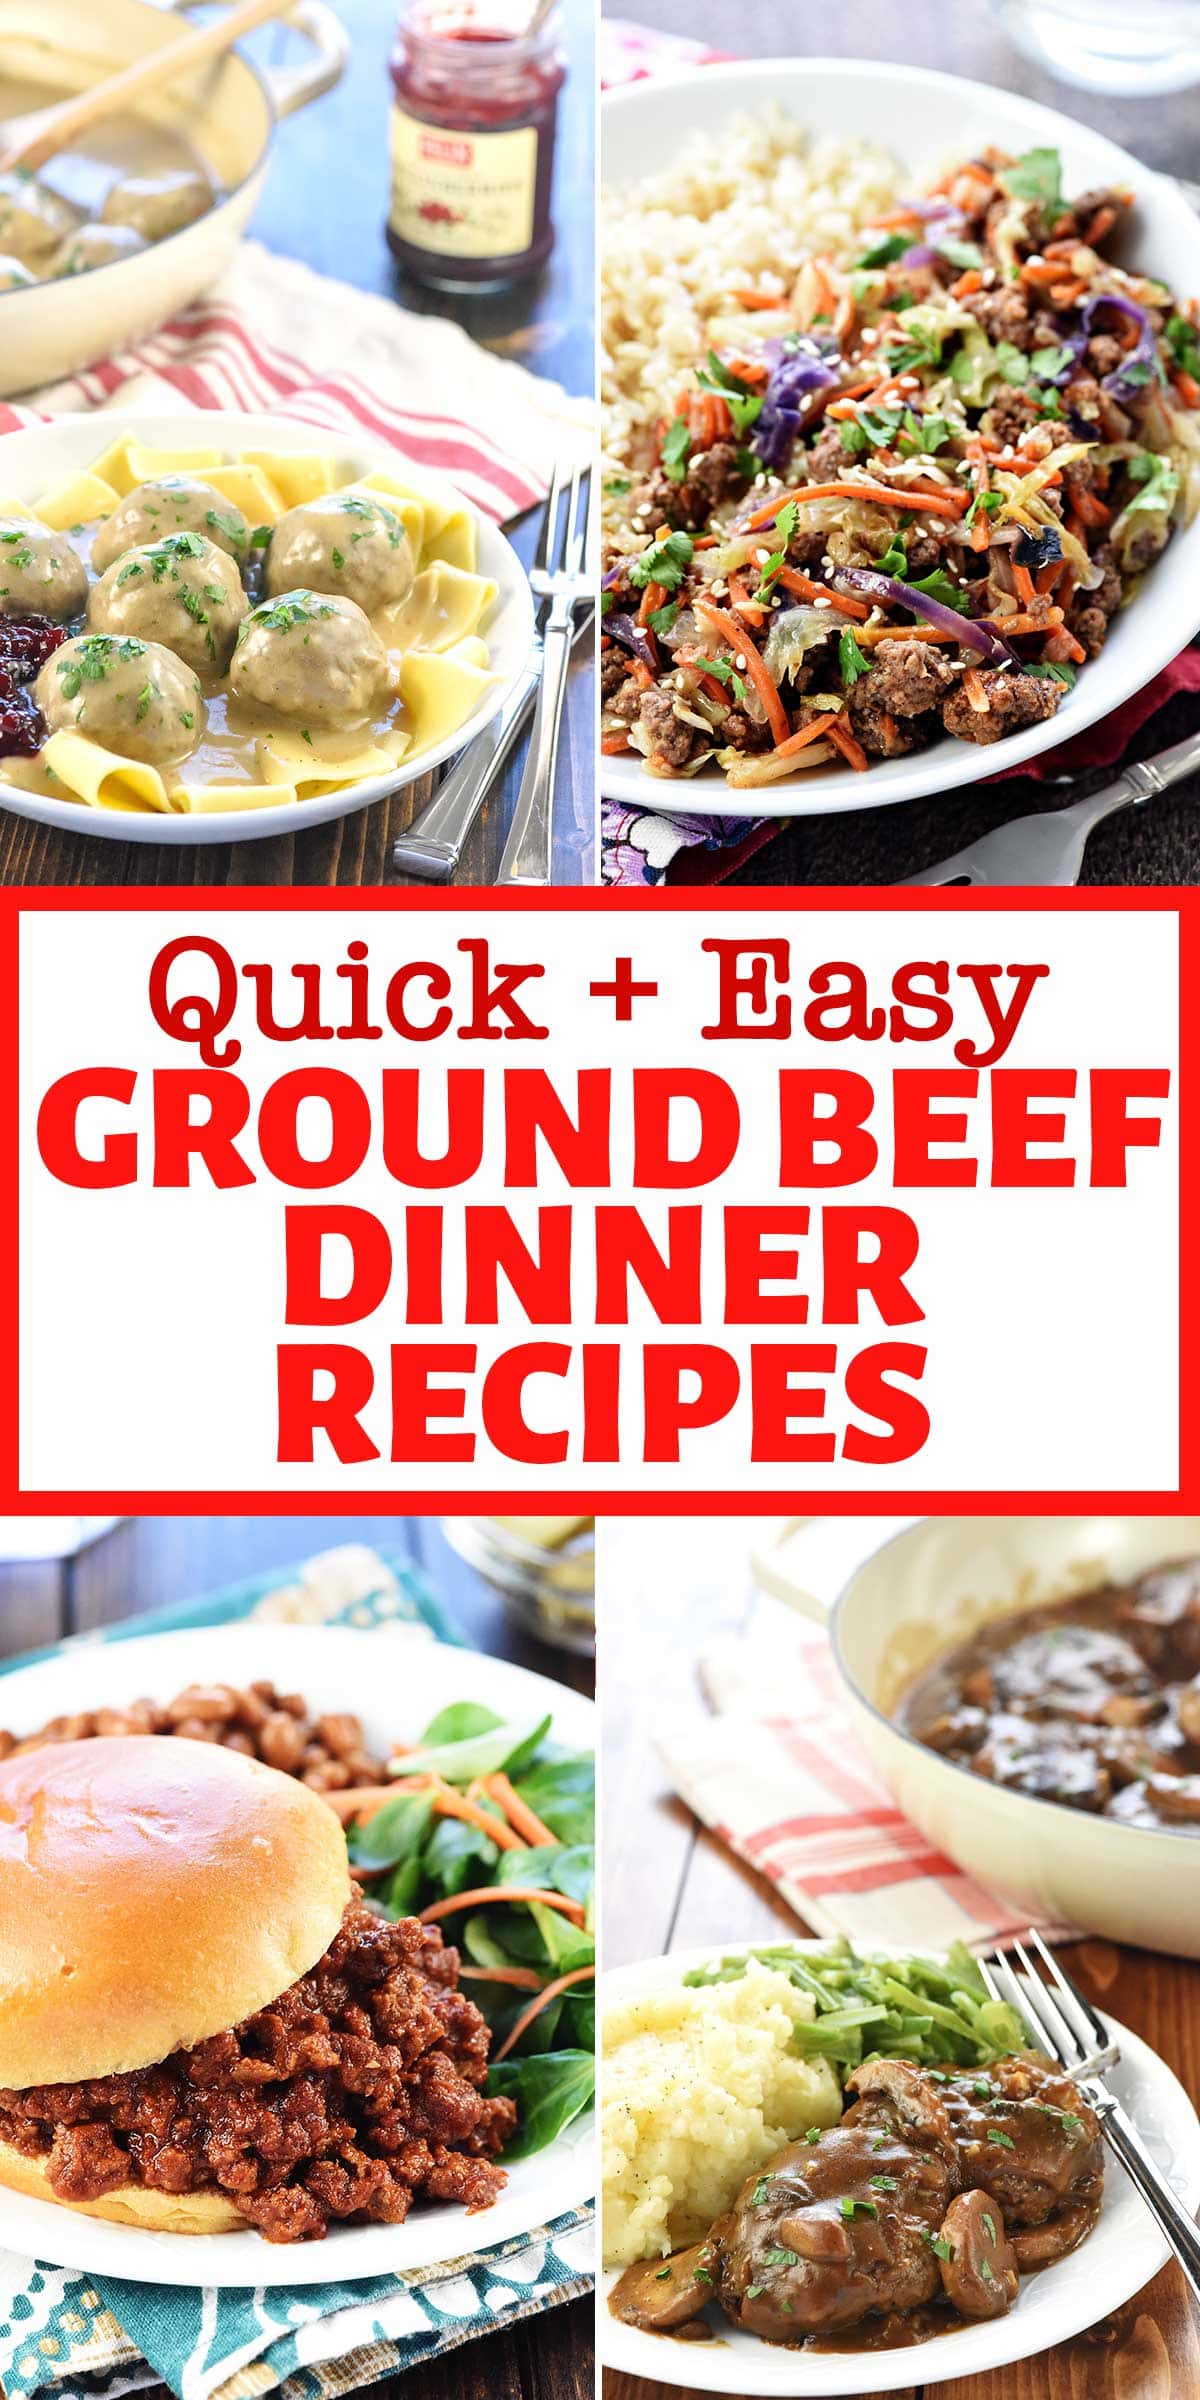 Ground Beef Dinner Ideas ~ this amazing collection of dinner recipes with ground beef includes dozens of quick, easy, family-friendly, and absolutely delicious ground beef recipes! From one-pot skillet dinners to cozy casseroles to everything in between, these ground beef dinners are perfect for busy weeknights! | FiveHeartHome.com via @fivehearthome